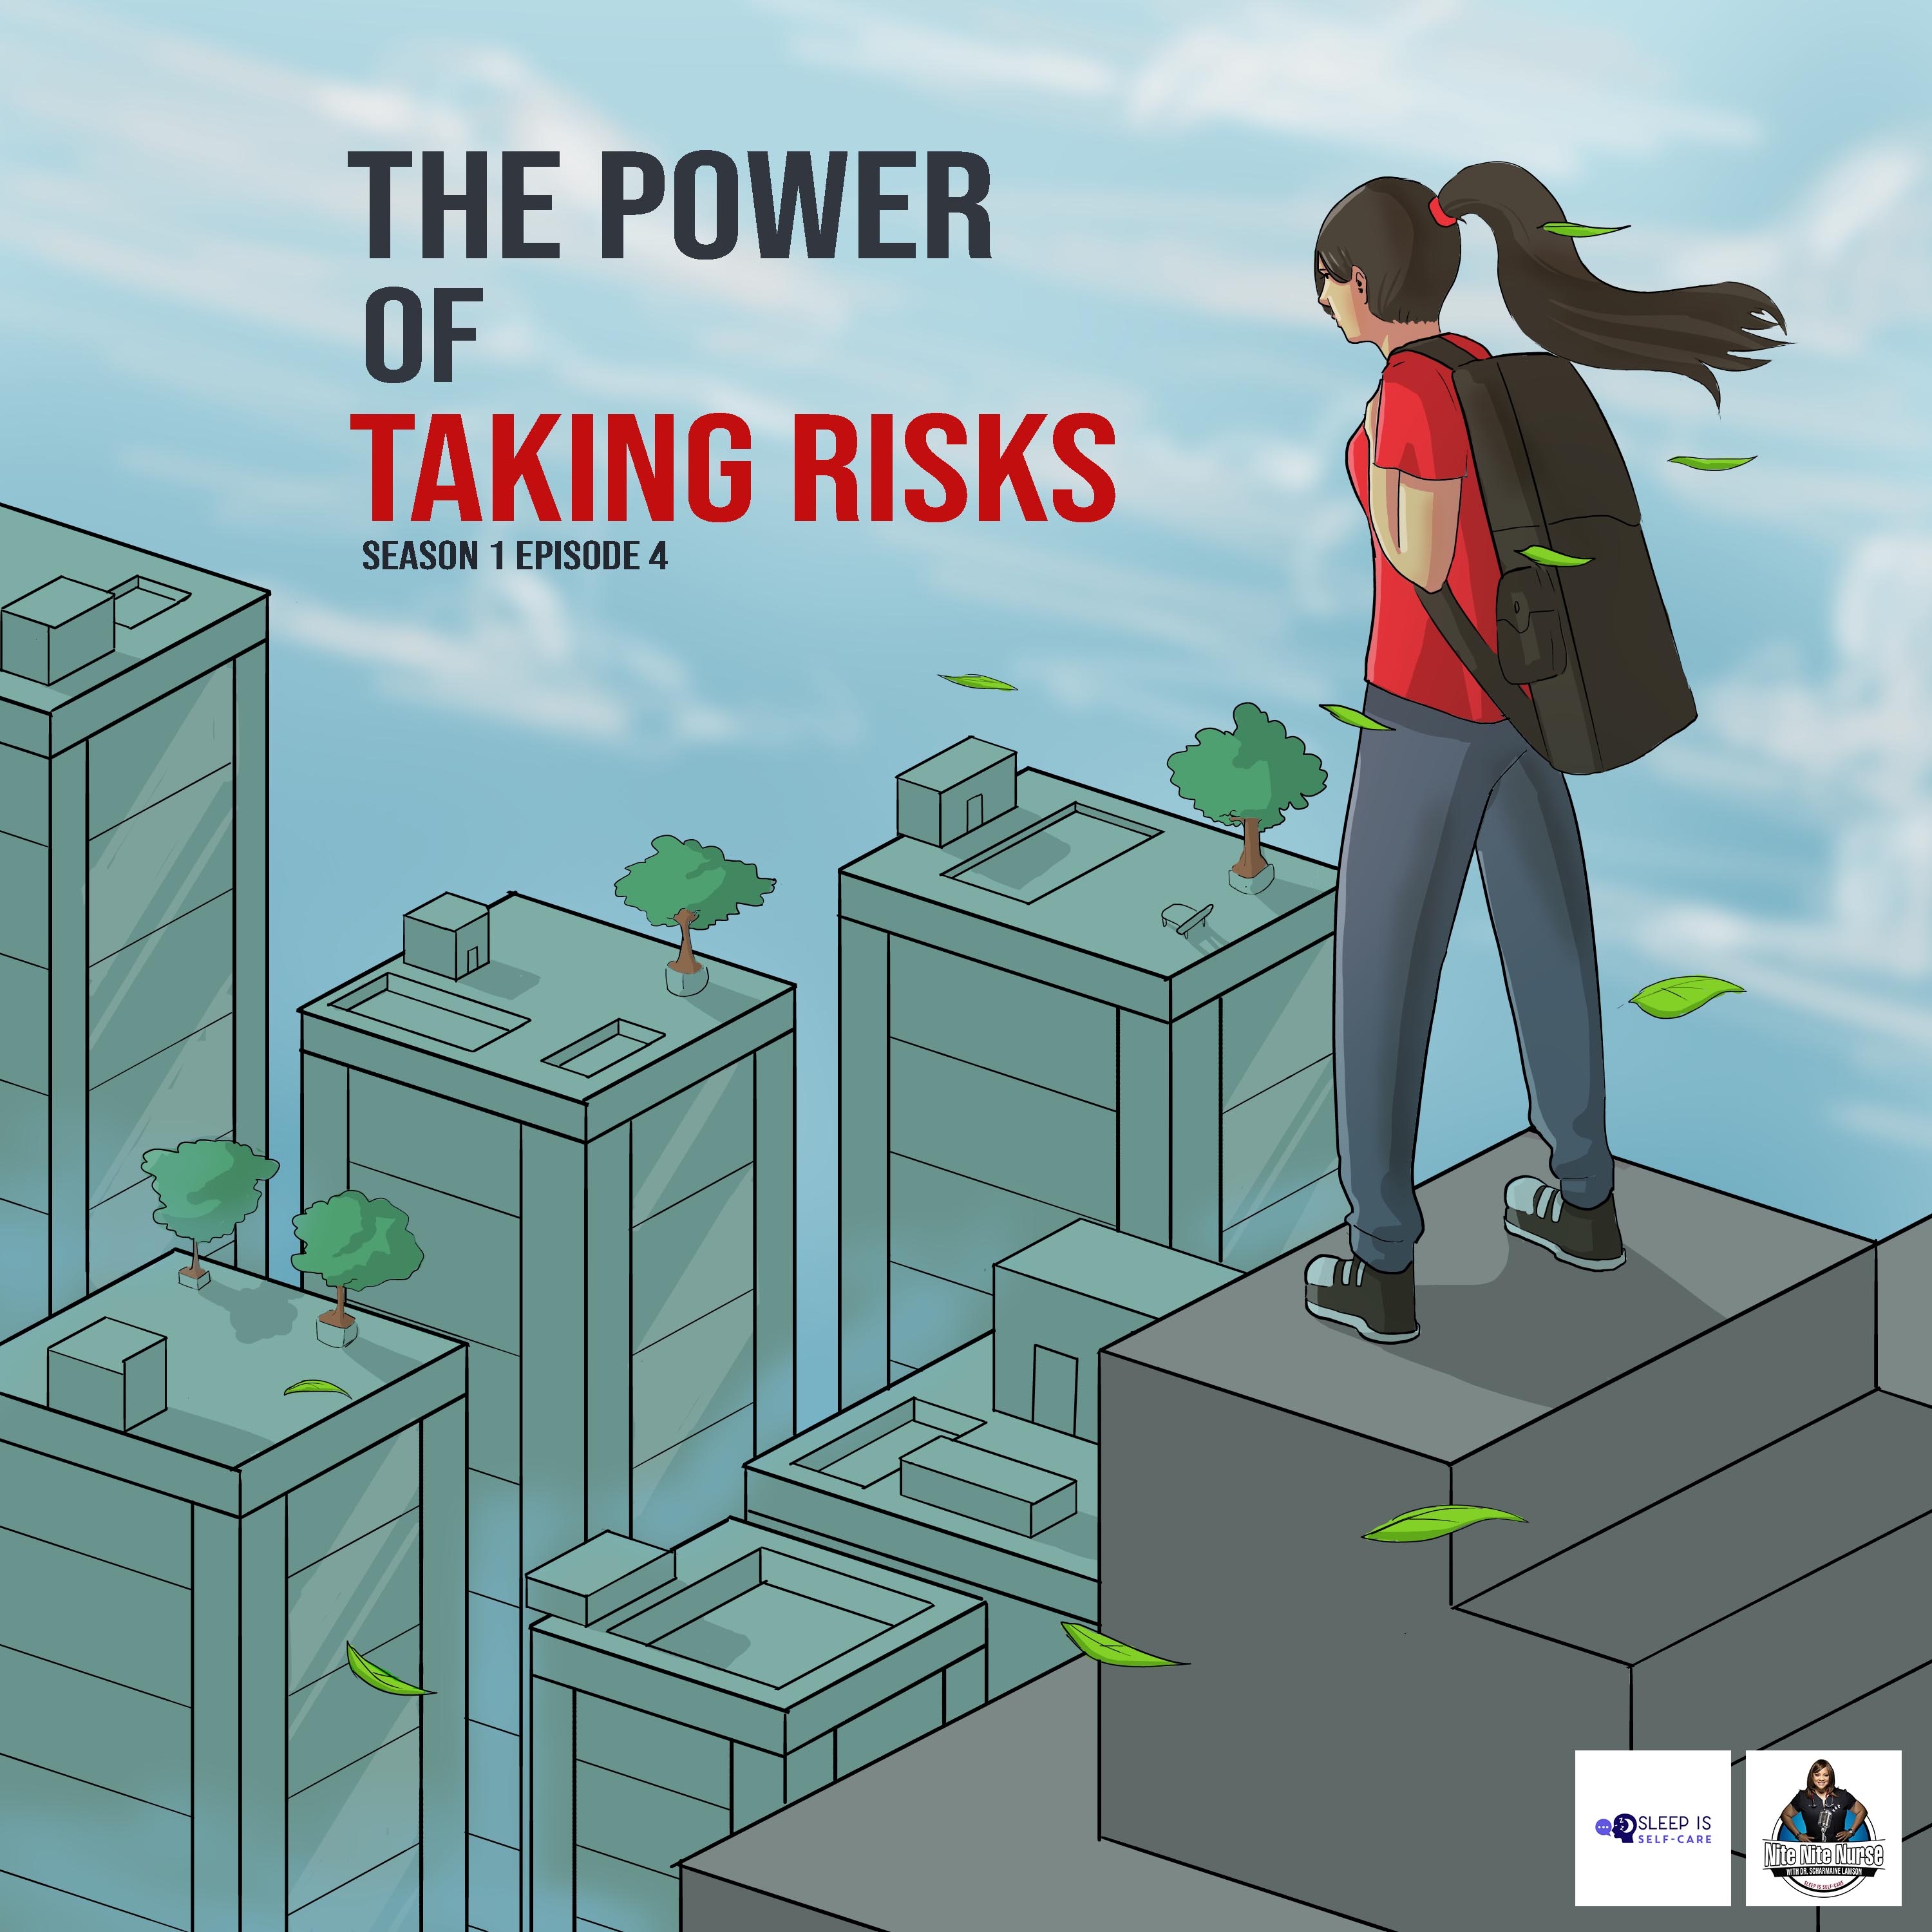 S1 Ep 4. The Power of Taking Risks